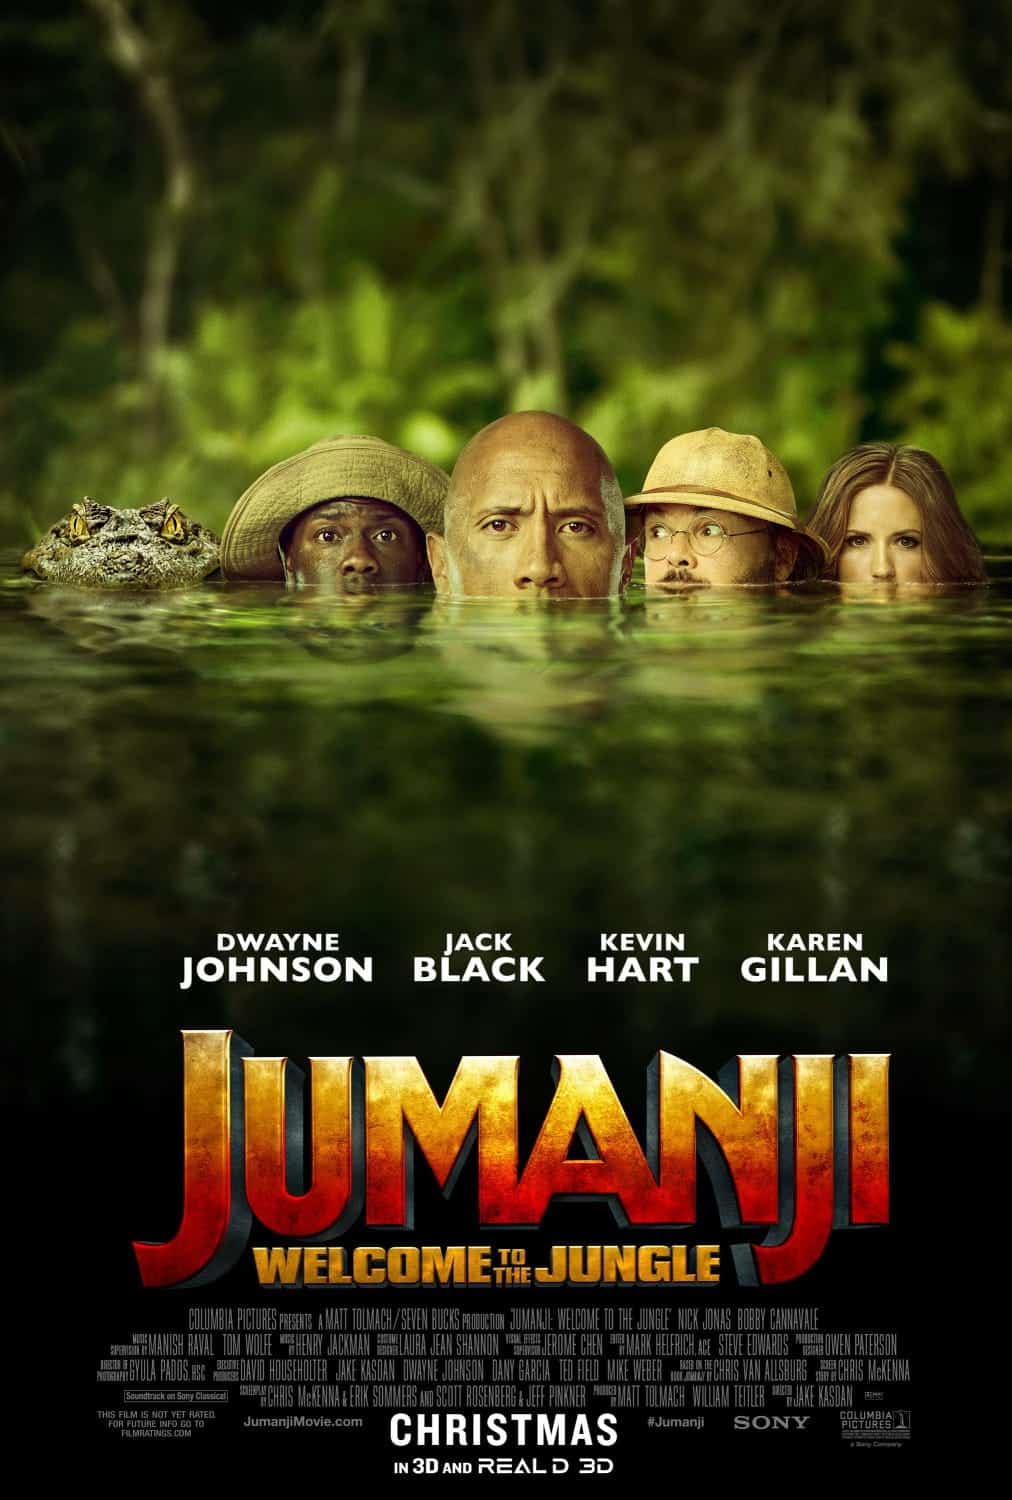 Jumanji Welcome to the Jungle (2017) Best Kevin Hart Movies (Ranked)